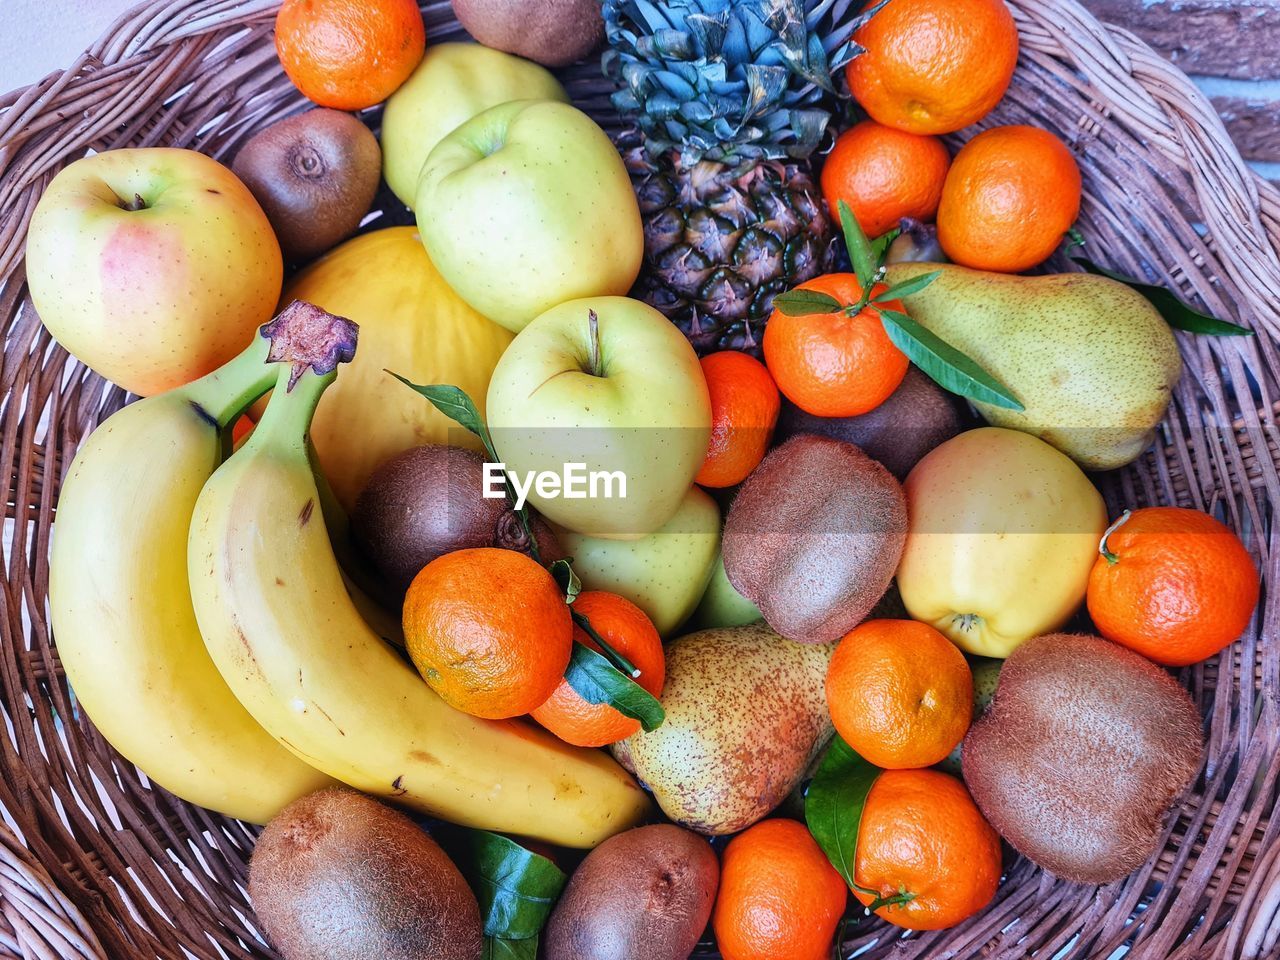 HIGH ANGLE VIEW OF APPLES AND FRUITS IN BASKET